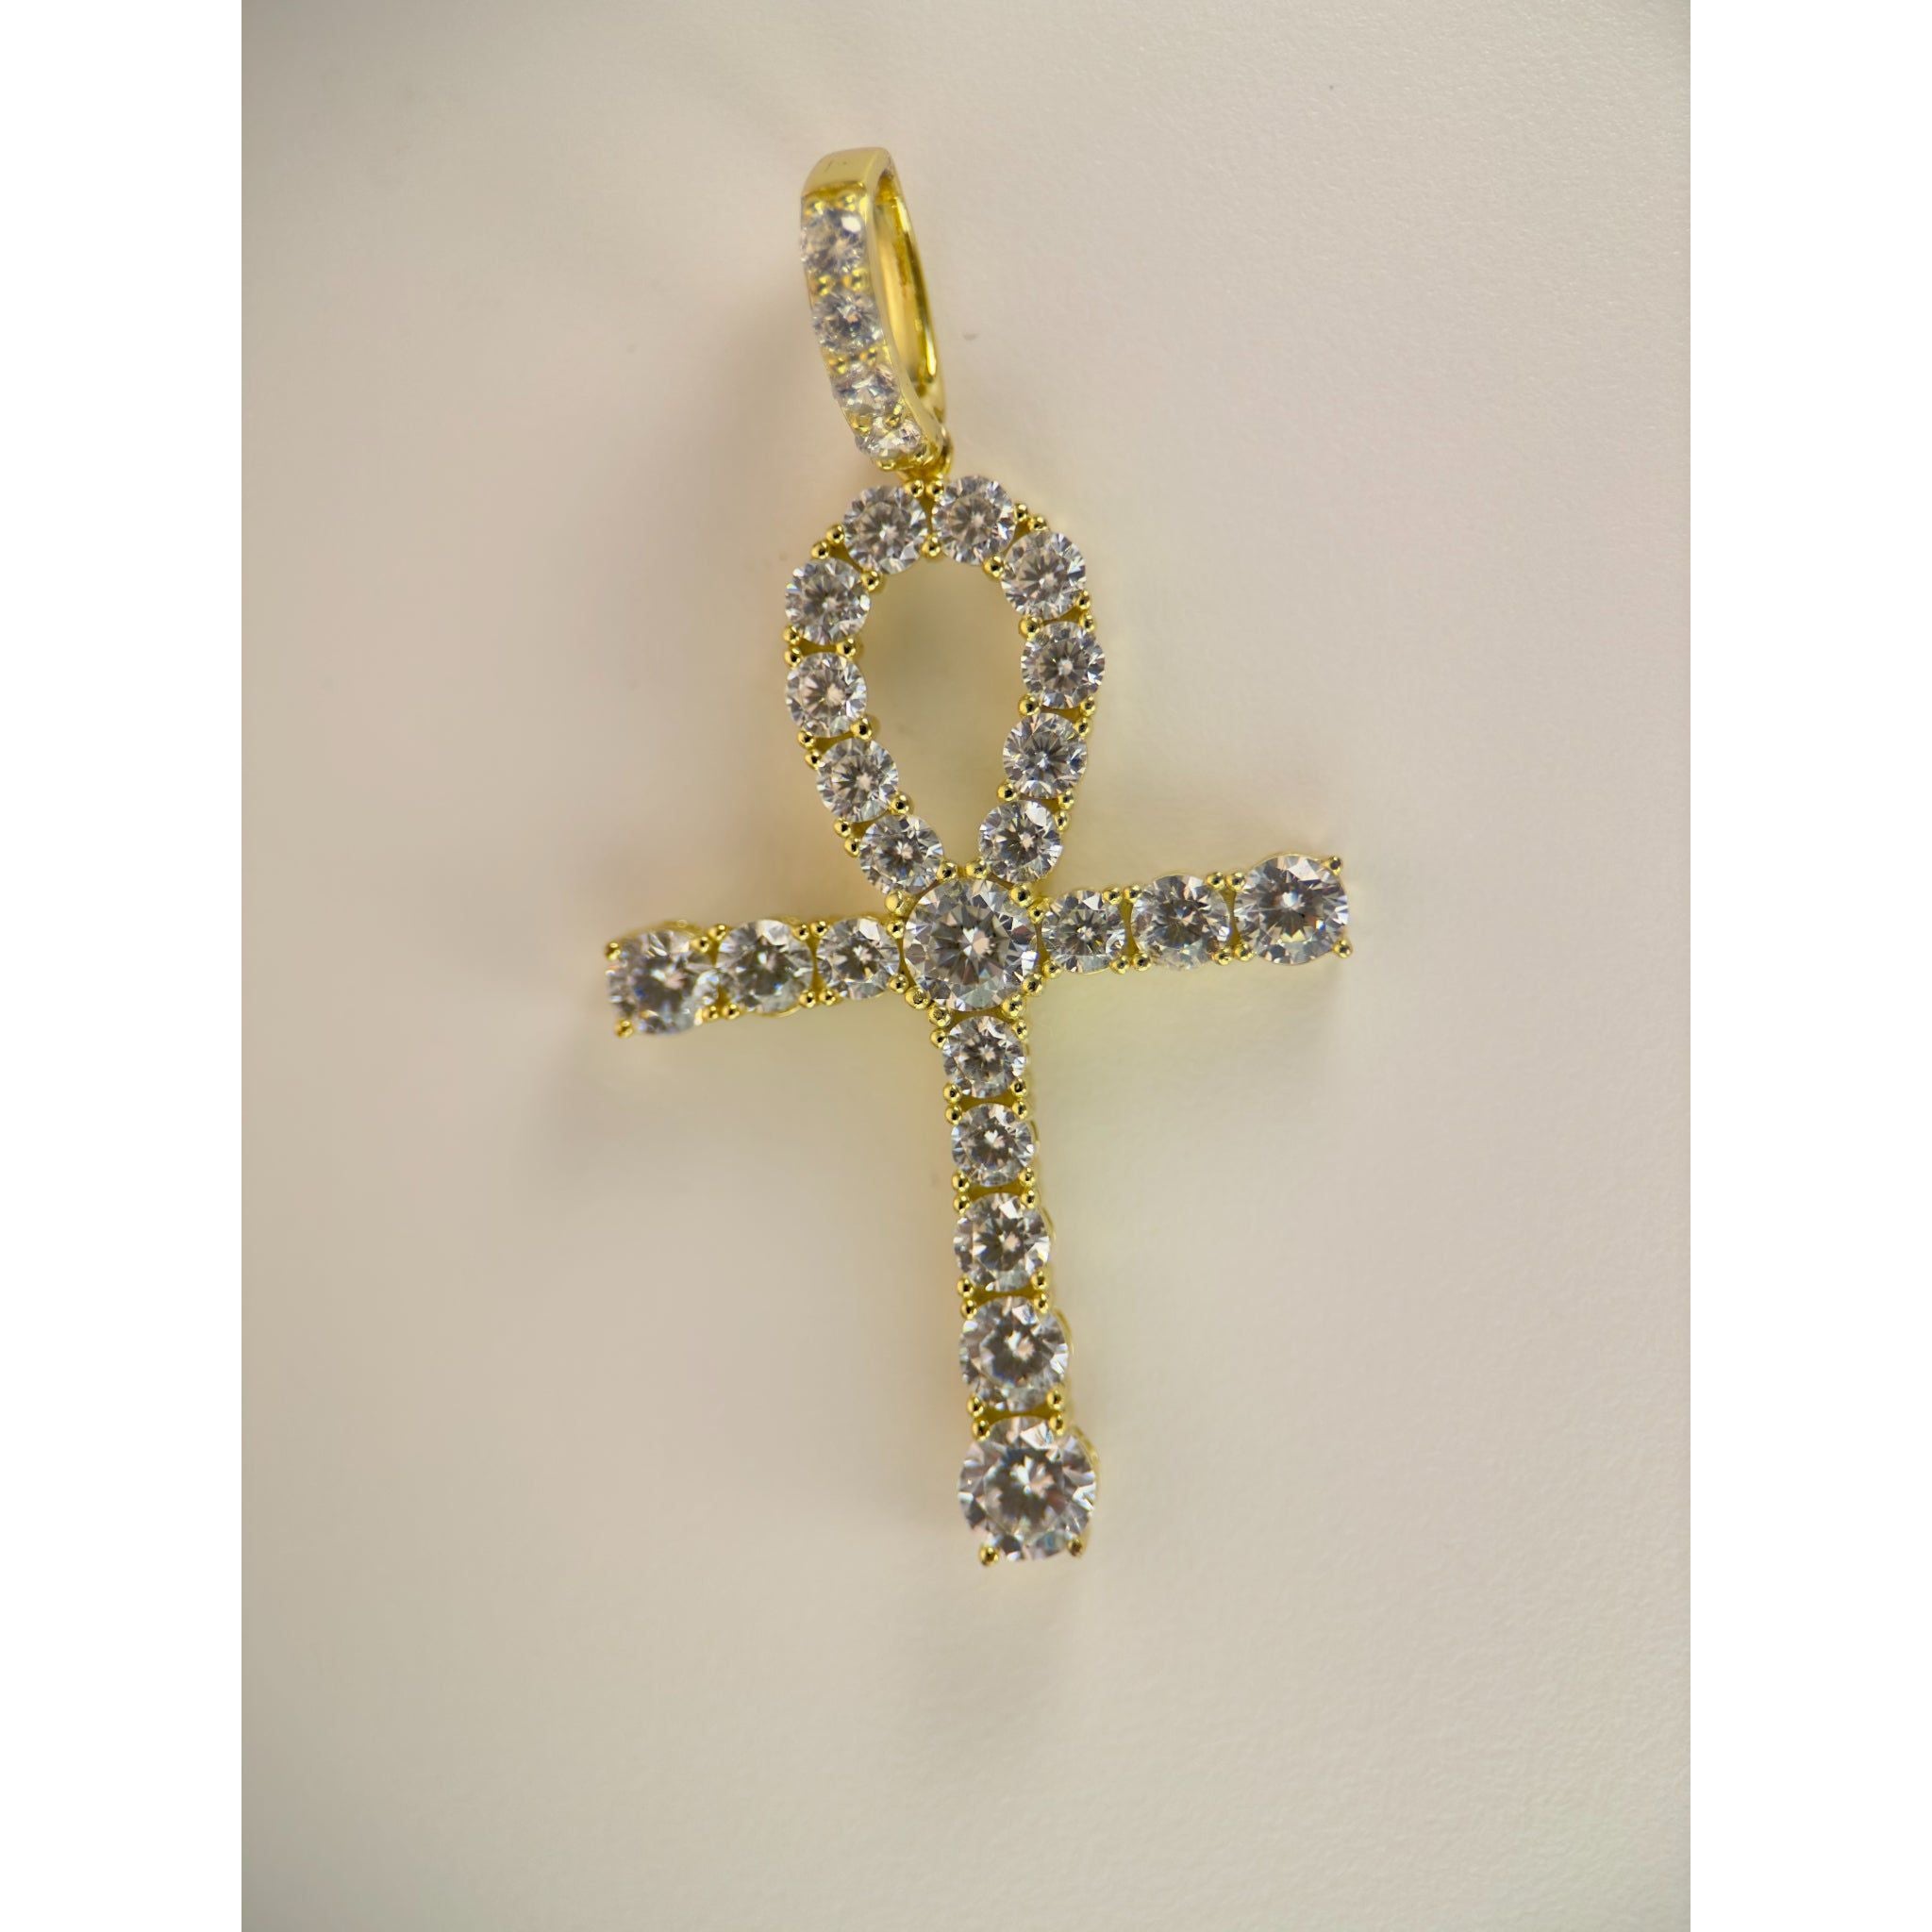 DR3169 - 925 Sterling Silver,14k Gold Bonded - Lab Created Stones - Pendant - Onk Cross Pendant